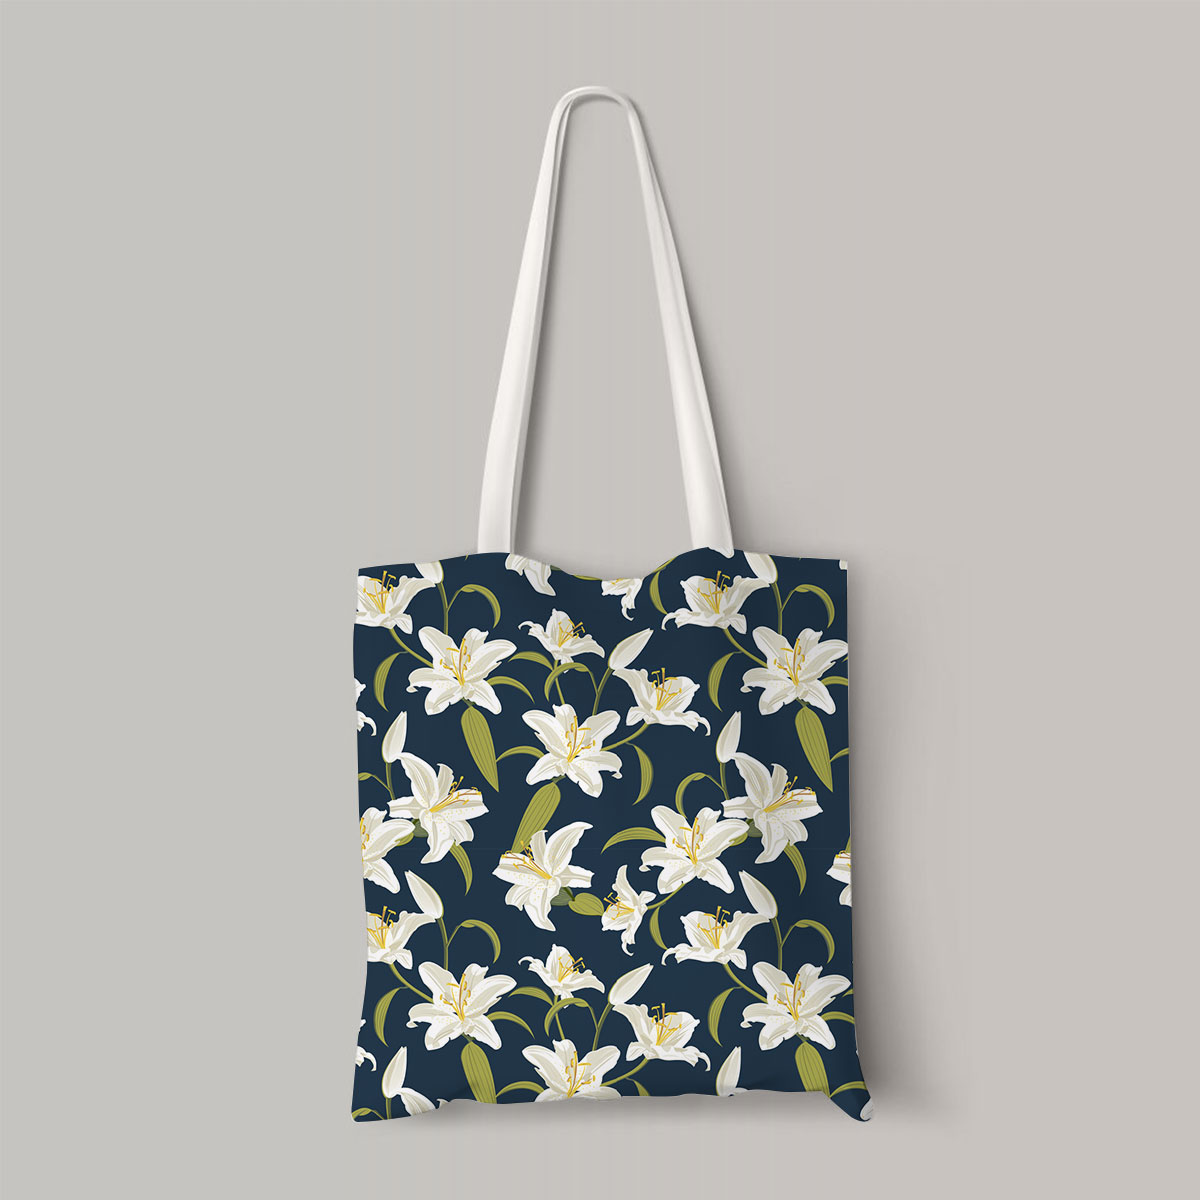 Lily Seamless Pattern On Blue Background Totebag